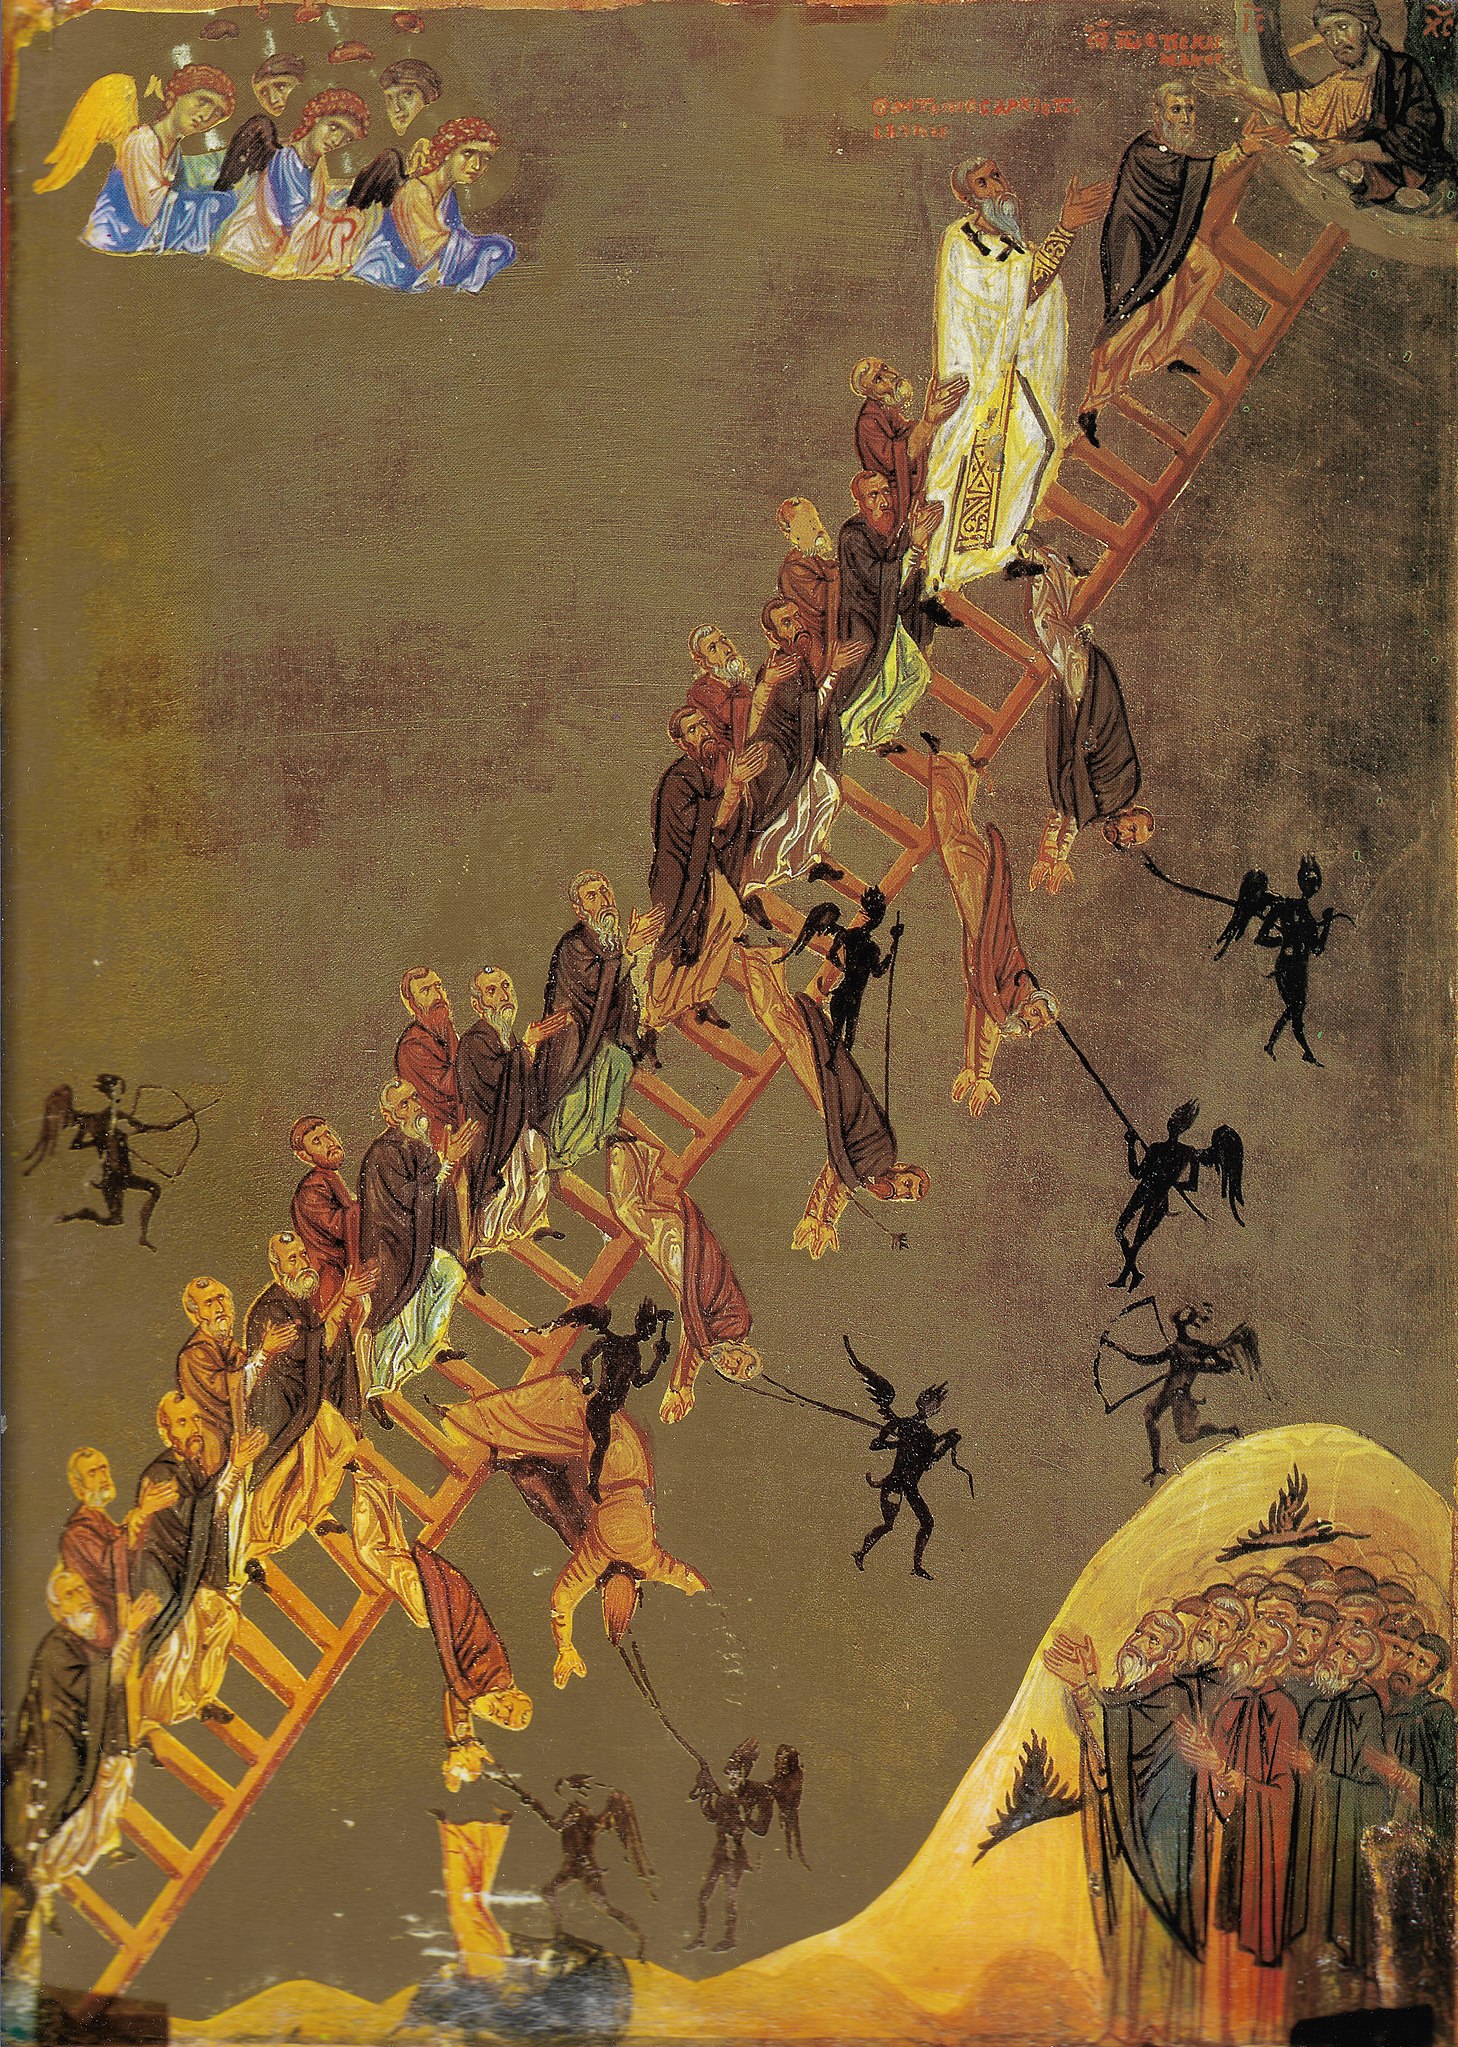 Ladder of Divine Ascent by Unknown Artist - 12th century Saint Catherine's Monastery